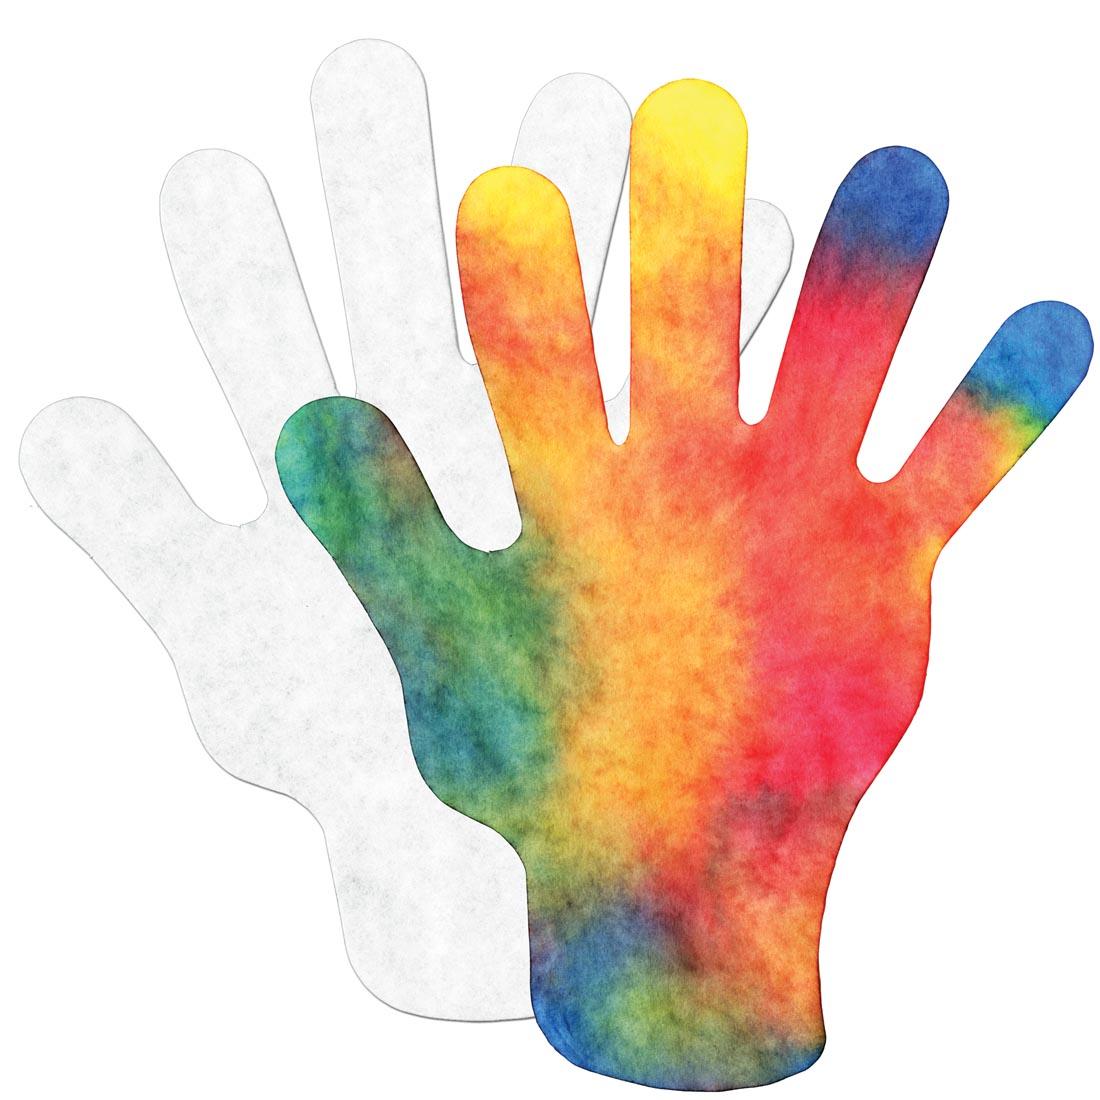 Roylco Color Diffusing Paper Hands - one blank and one completed colored example